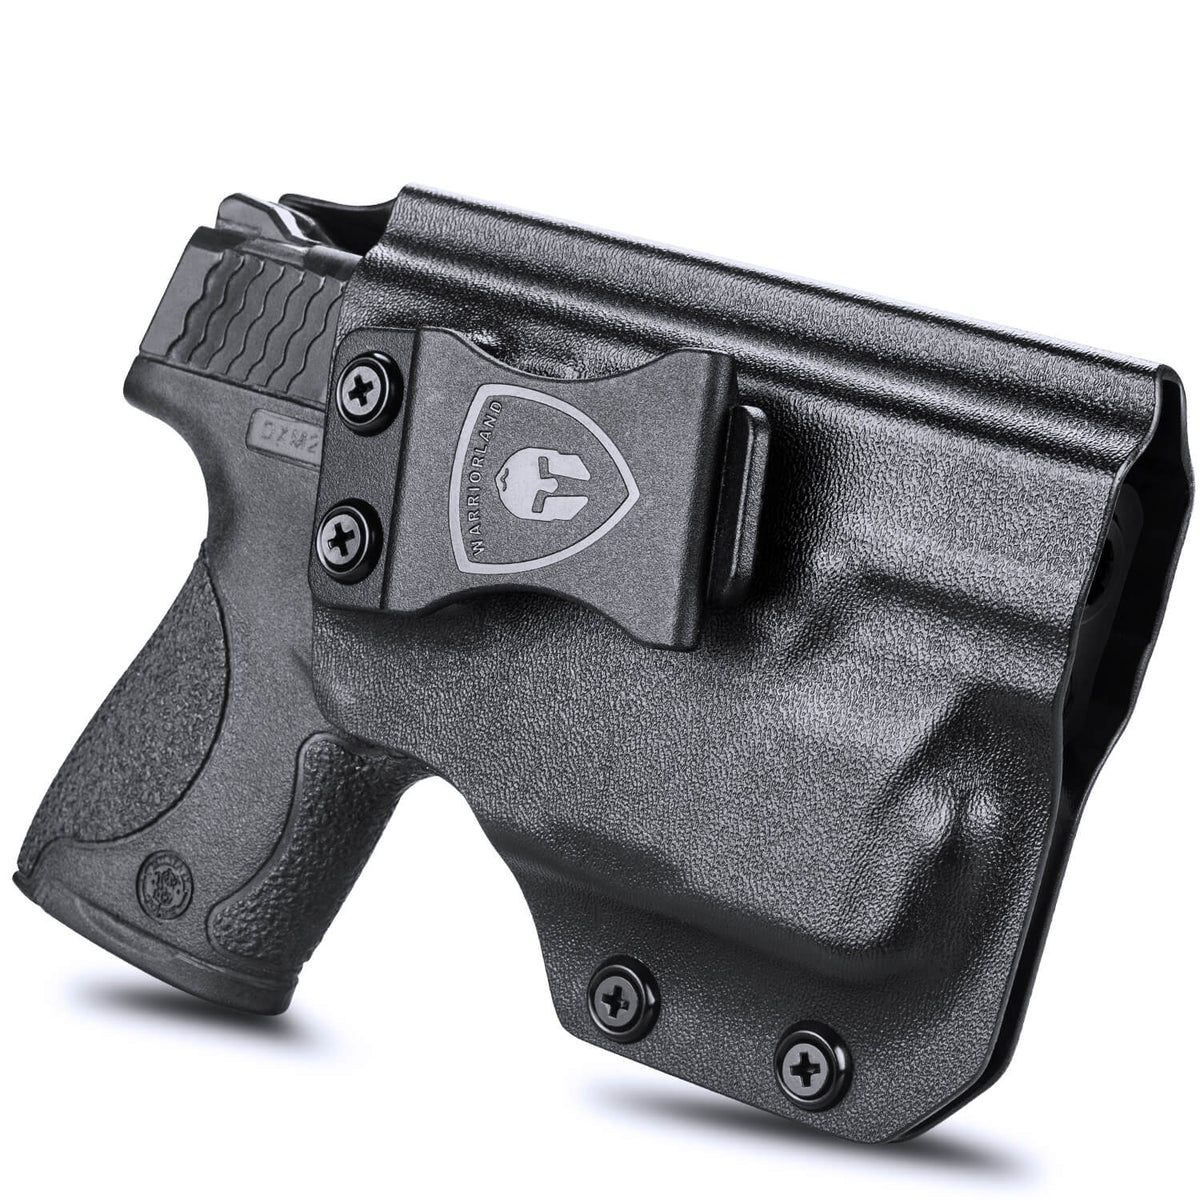 IWB Kydex Light Bearing Holster for S&W M&P Shield 9/.40 M2.0 Pistol with TLR 6  Right/ Left Handed | WARRIORLAND